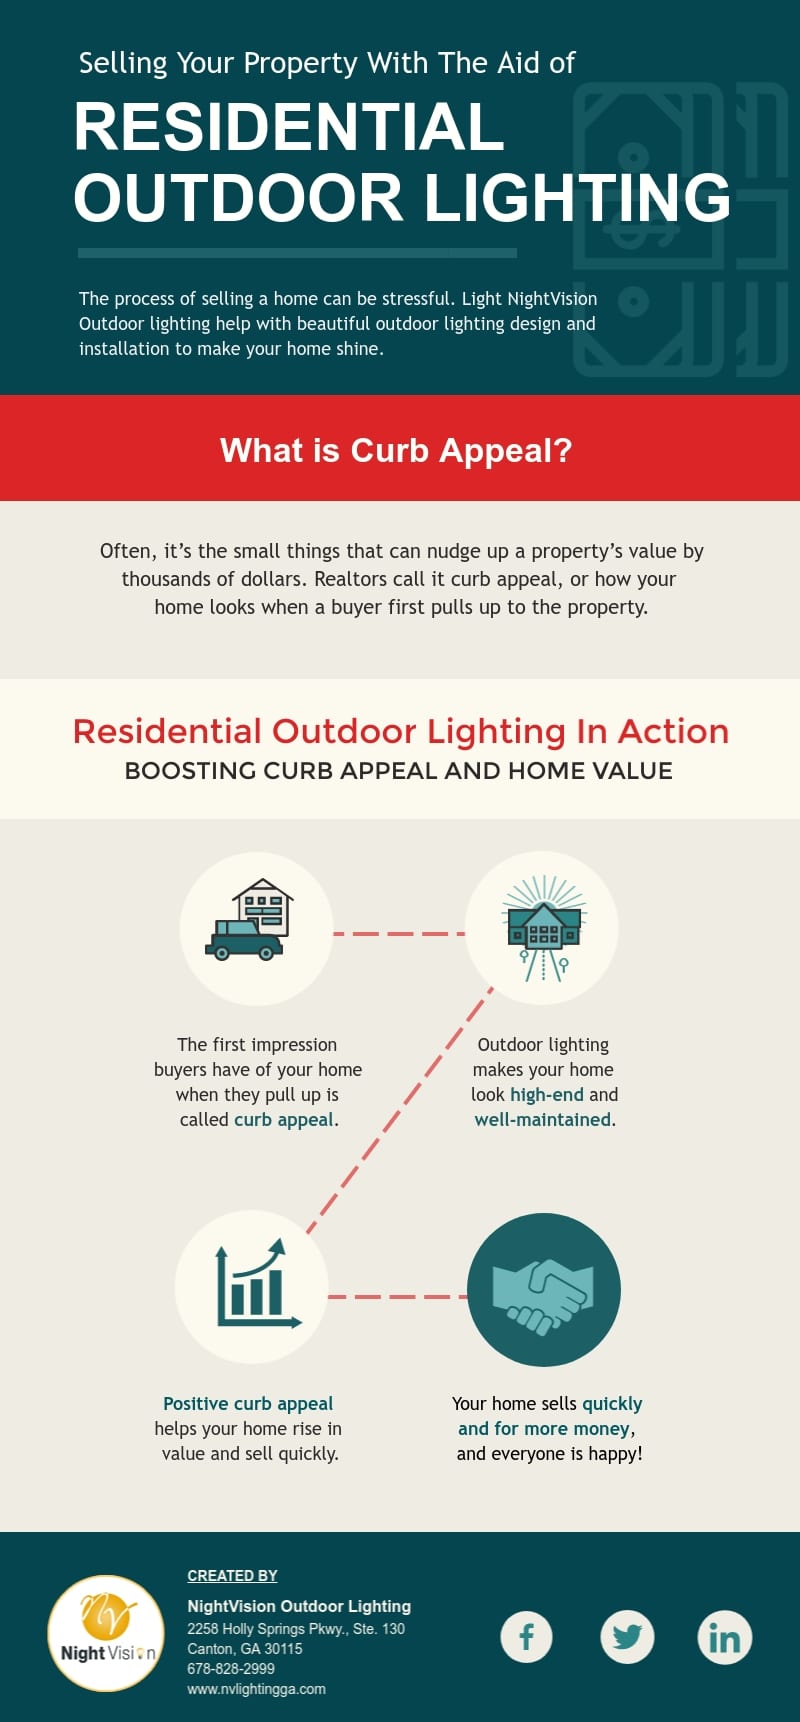 Selling Your Property With The Aid of Residential Outdoor Lighting [infographic]